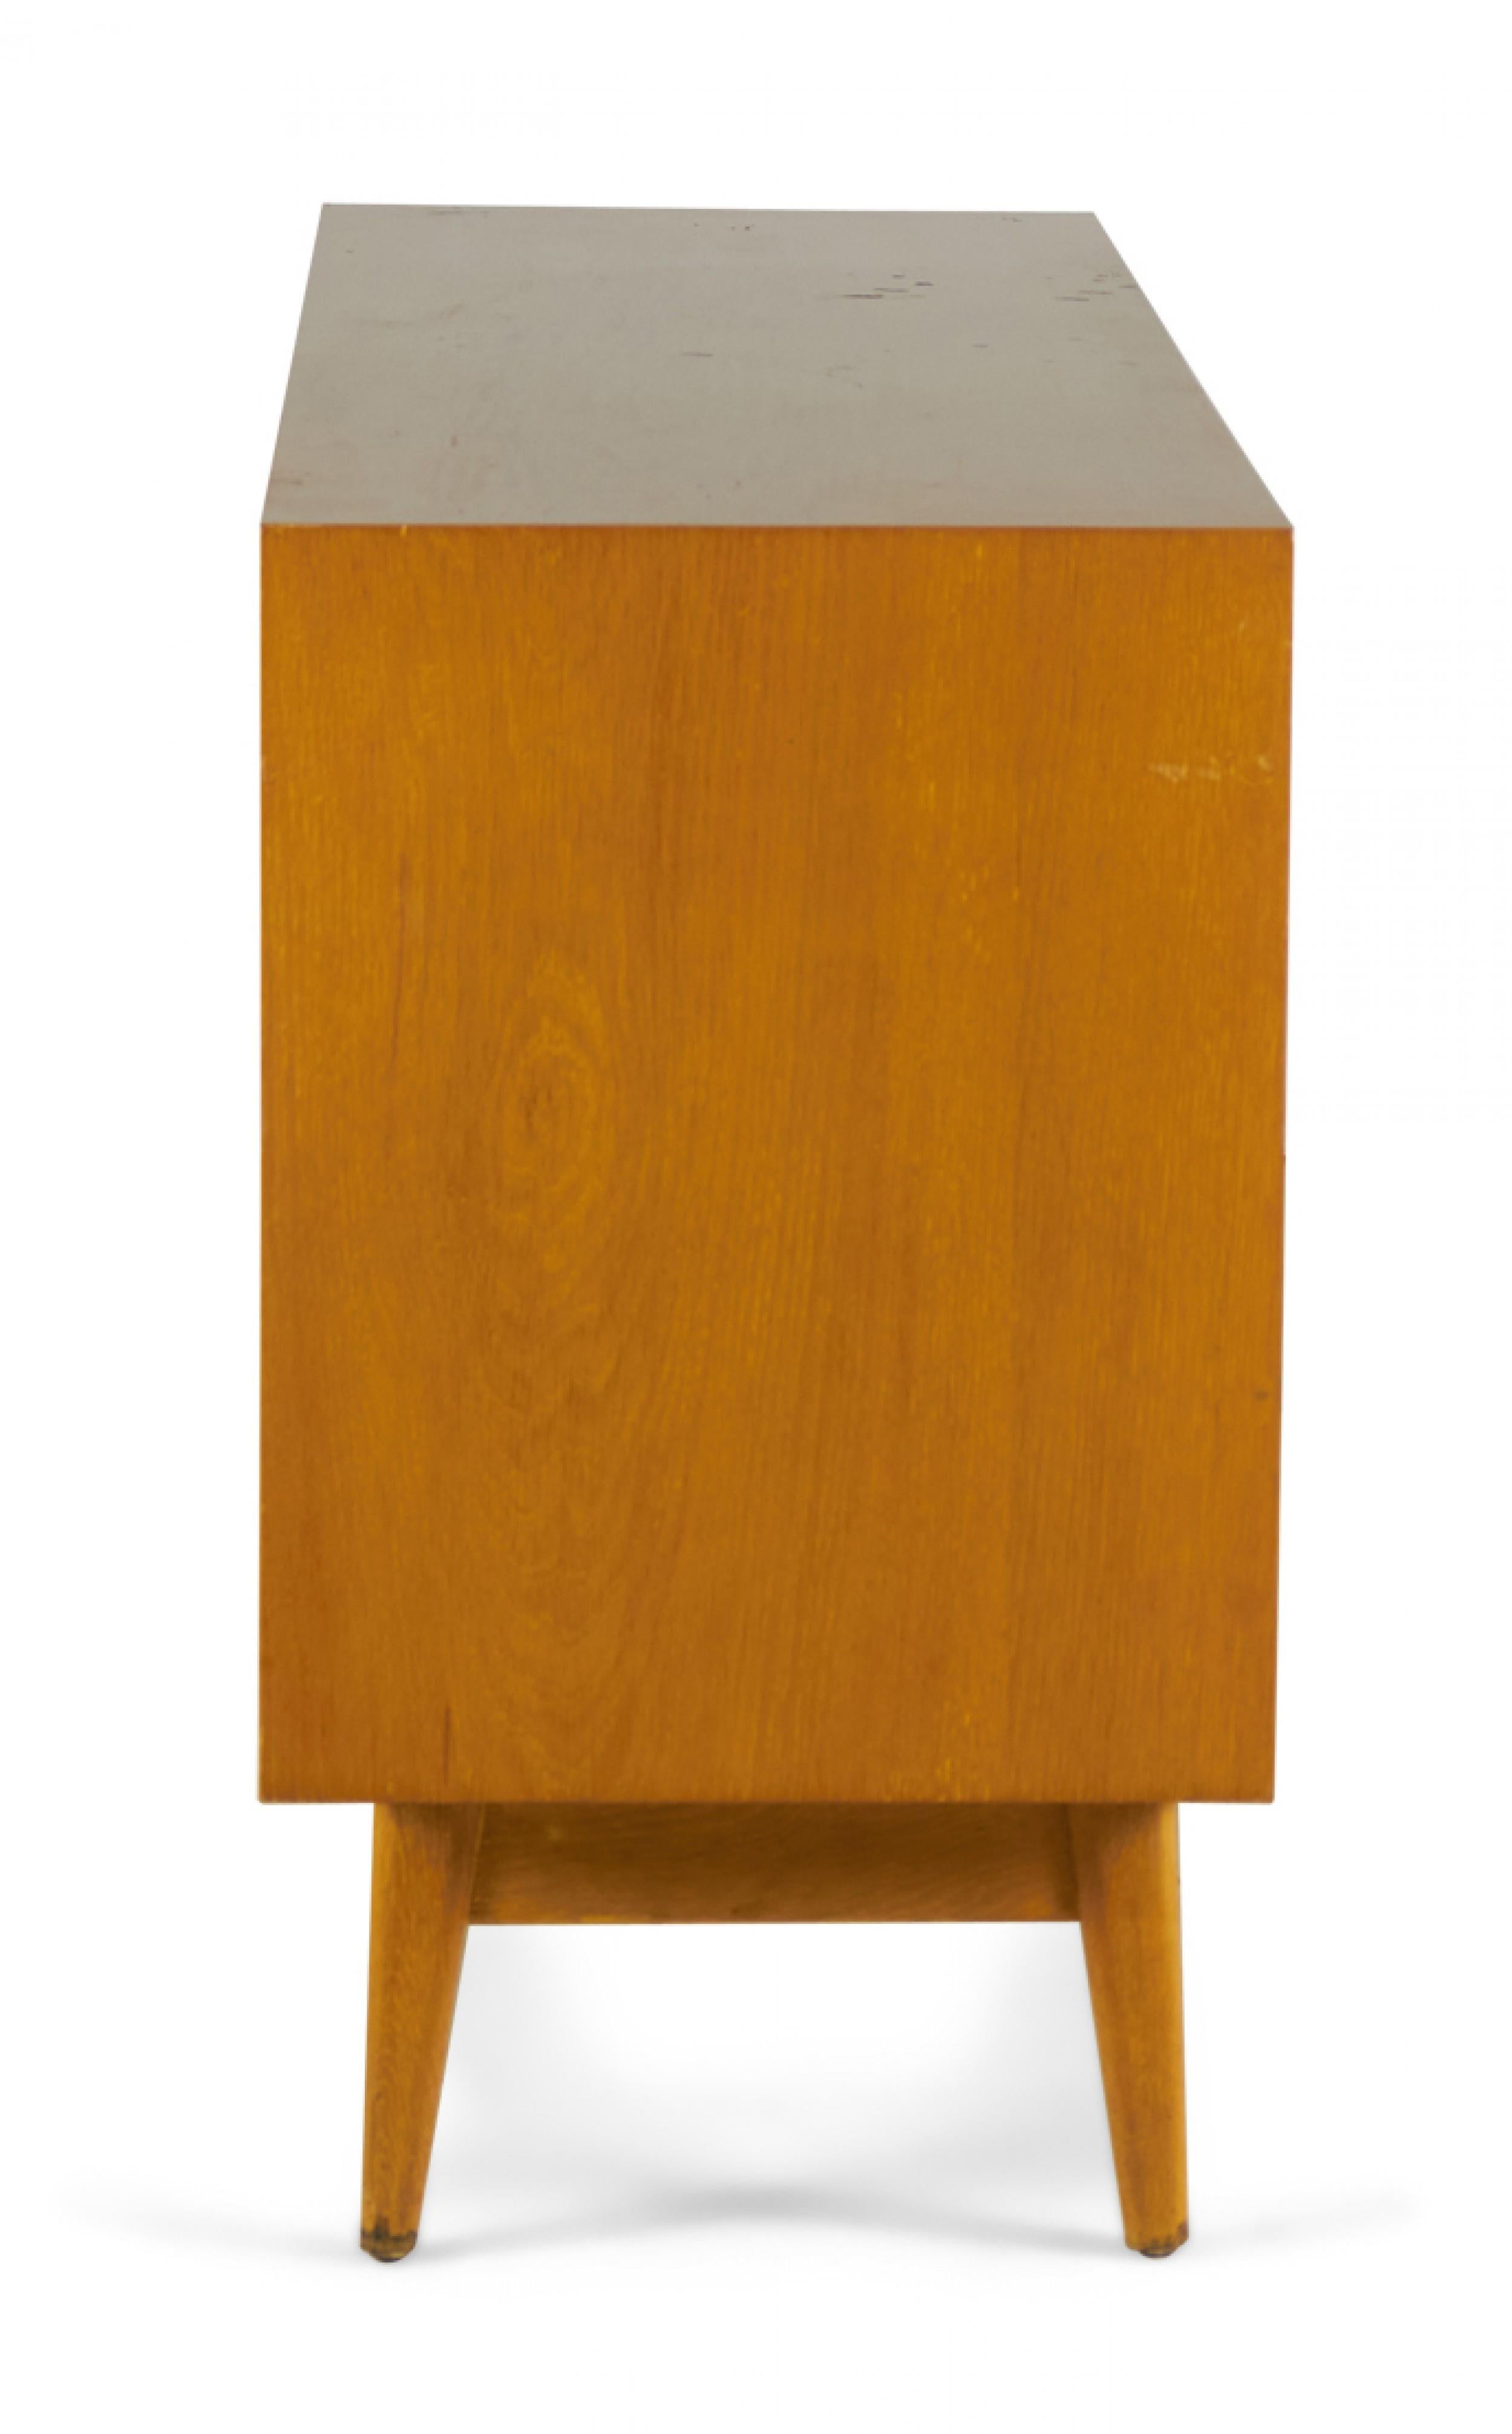 Danish Mid-Century dresser with 6 drawers with angled rectangular oak drawer pulls in a blond oak case resting on four tapered legs. (JENS RISOM)
